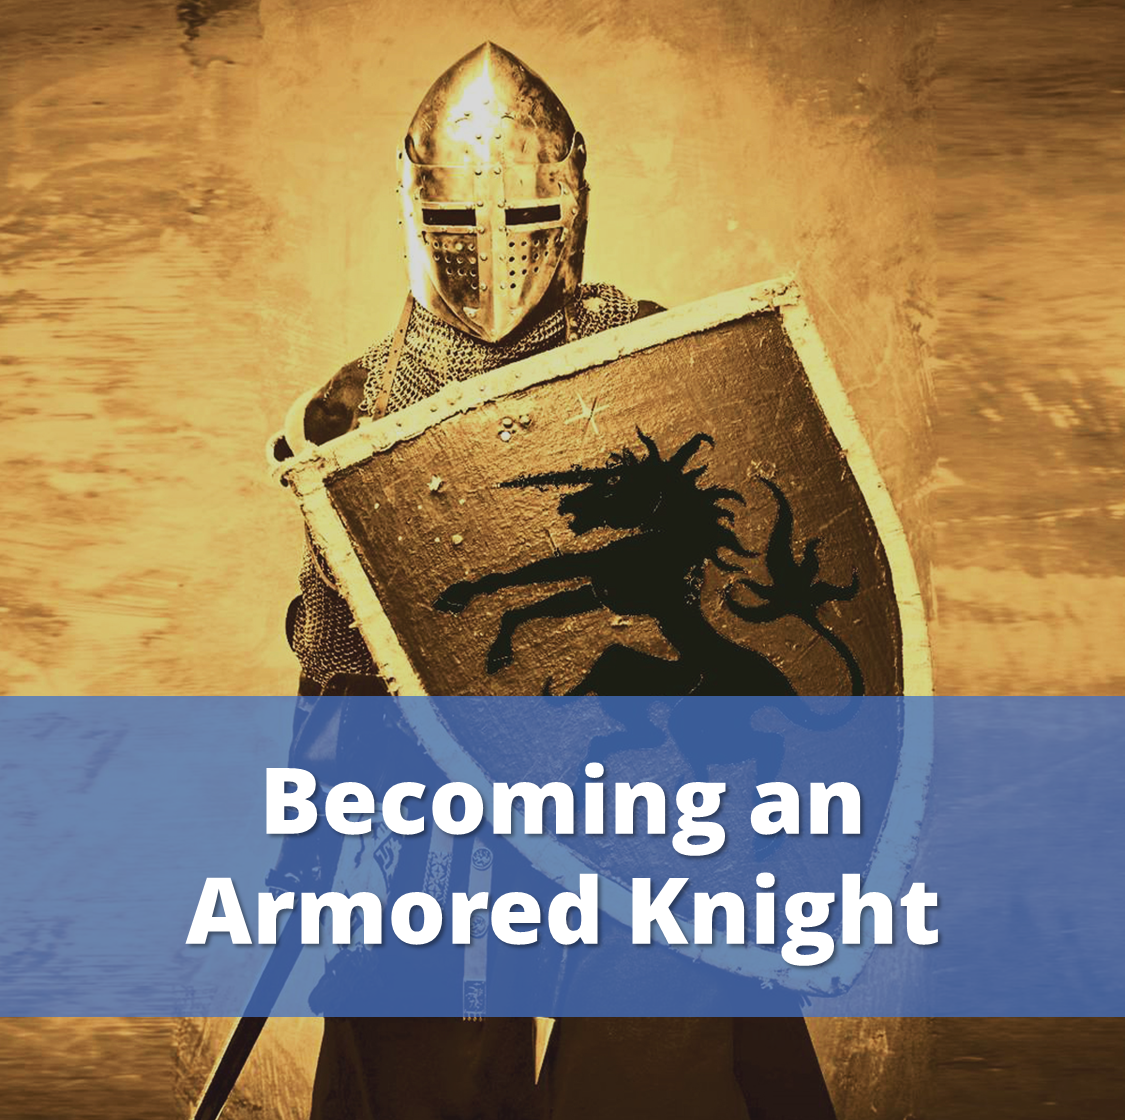 Becoming an Armored Knight course cover square shape.